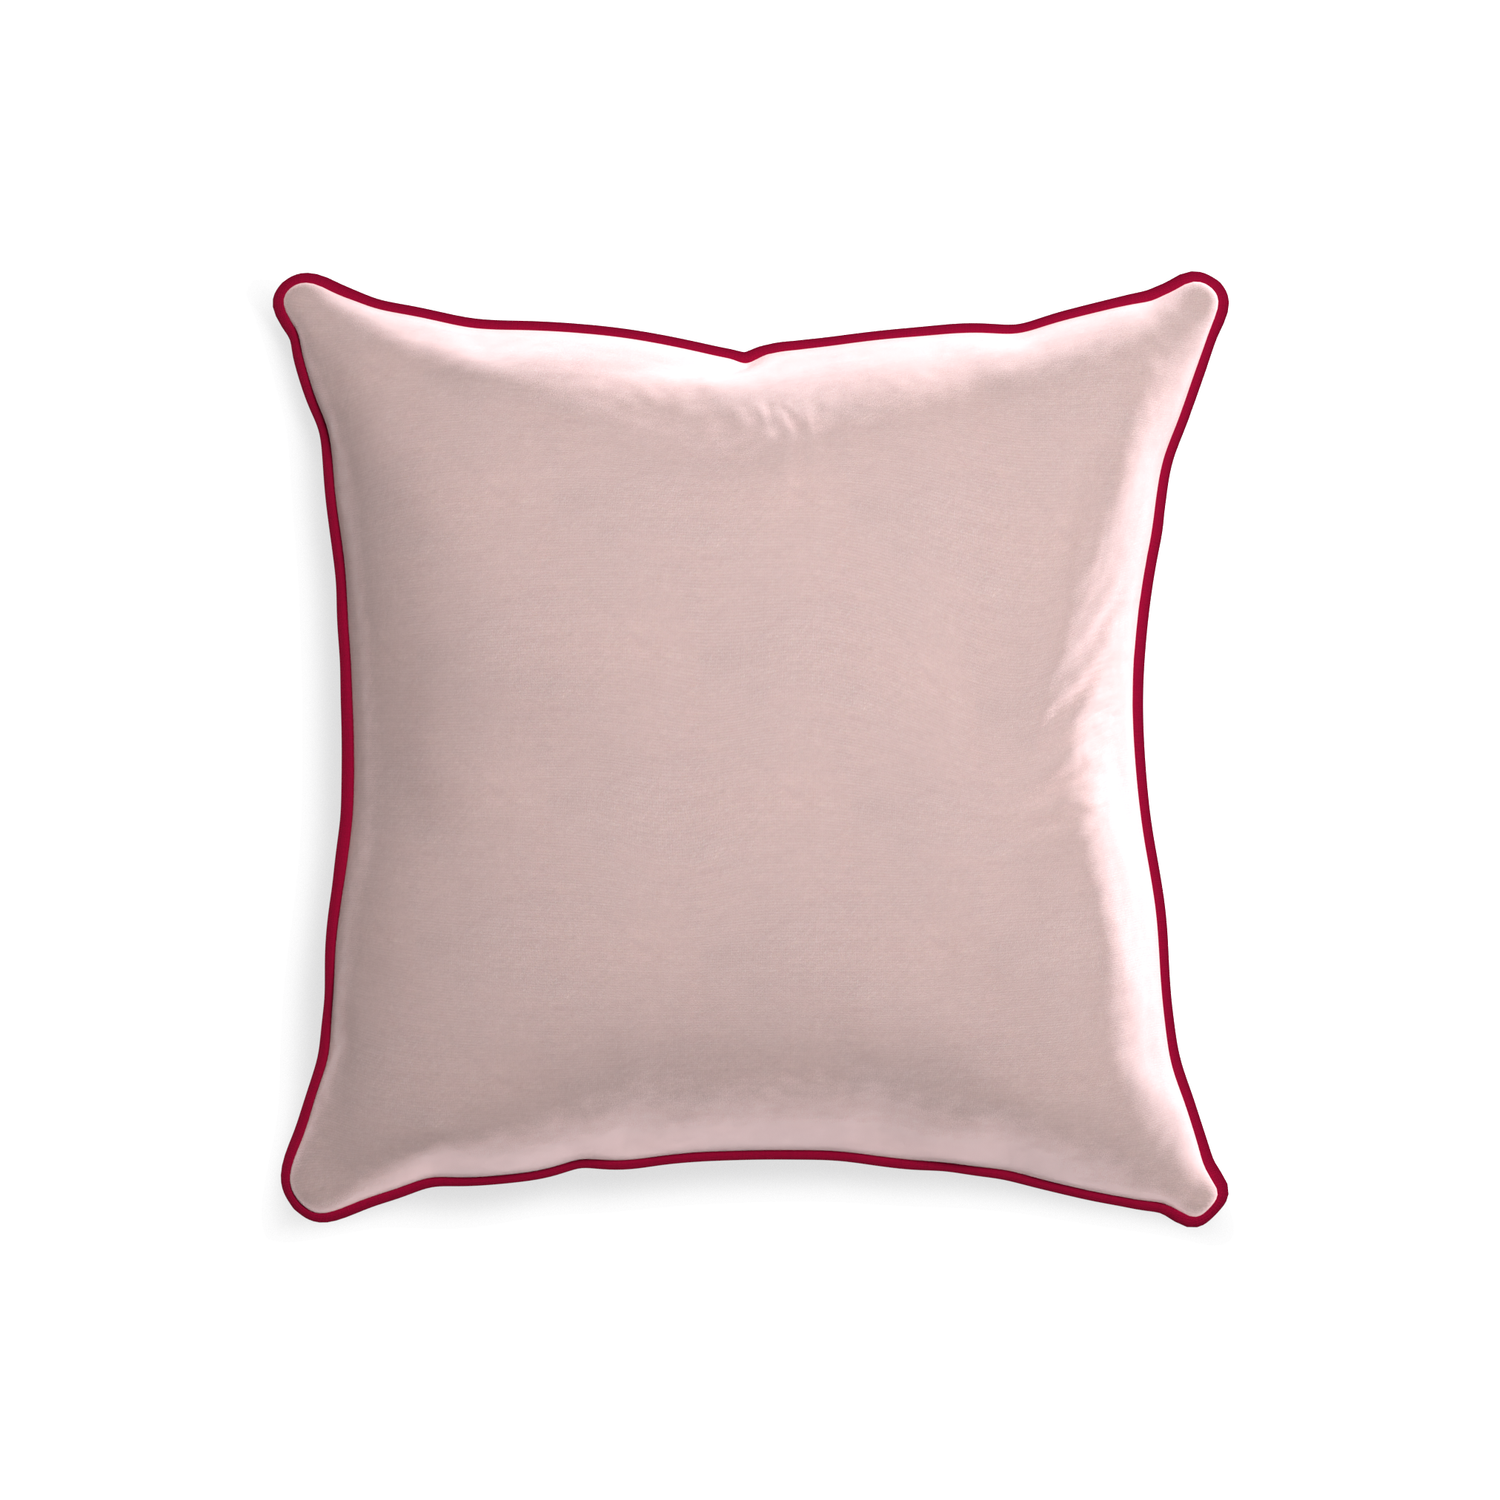 square light pink velvet pillow with dark red piping